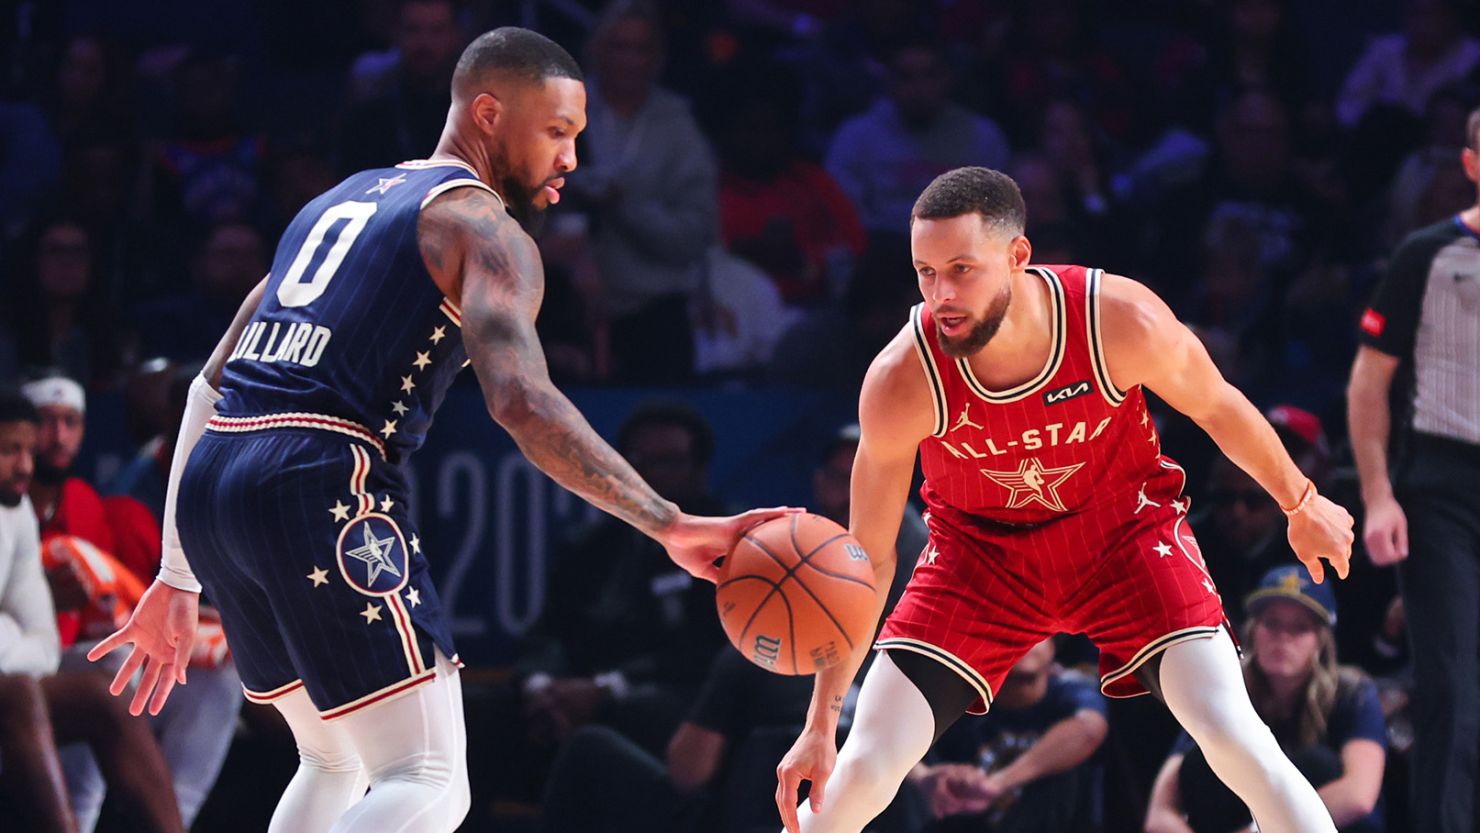 Rethinking the NBA All-Star Game